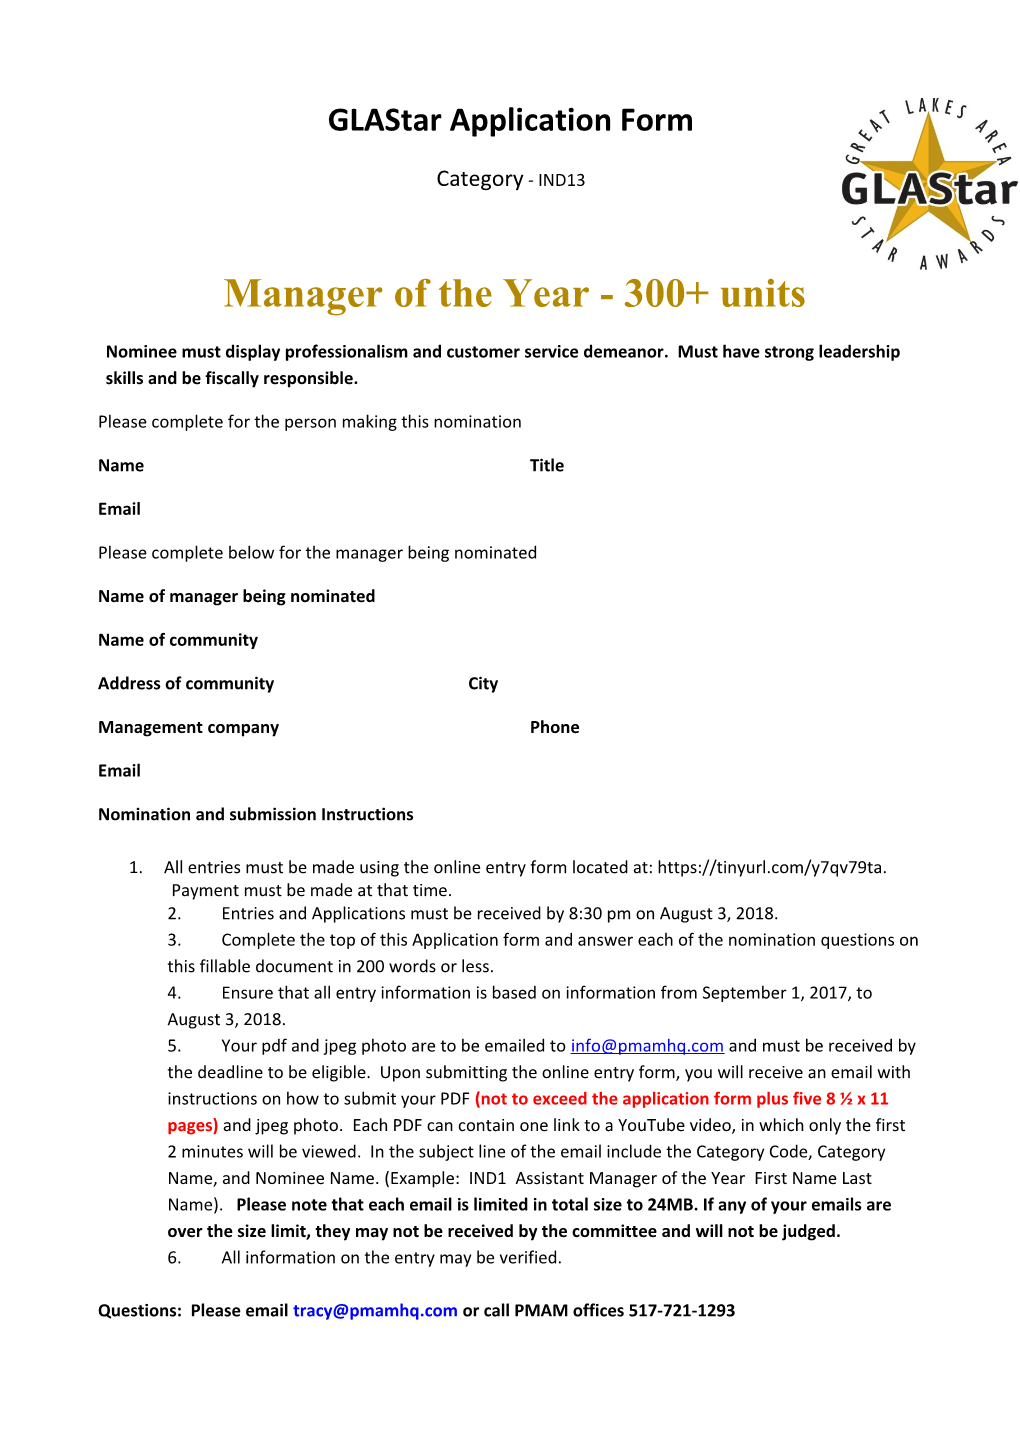 Manager of the Year - 300+ Units